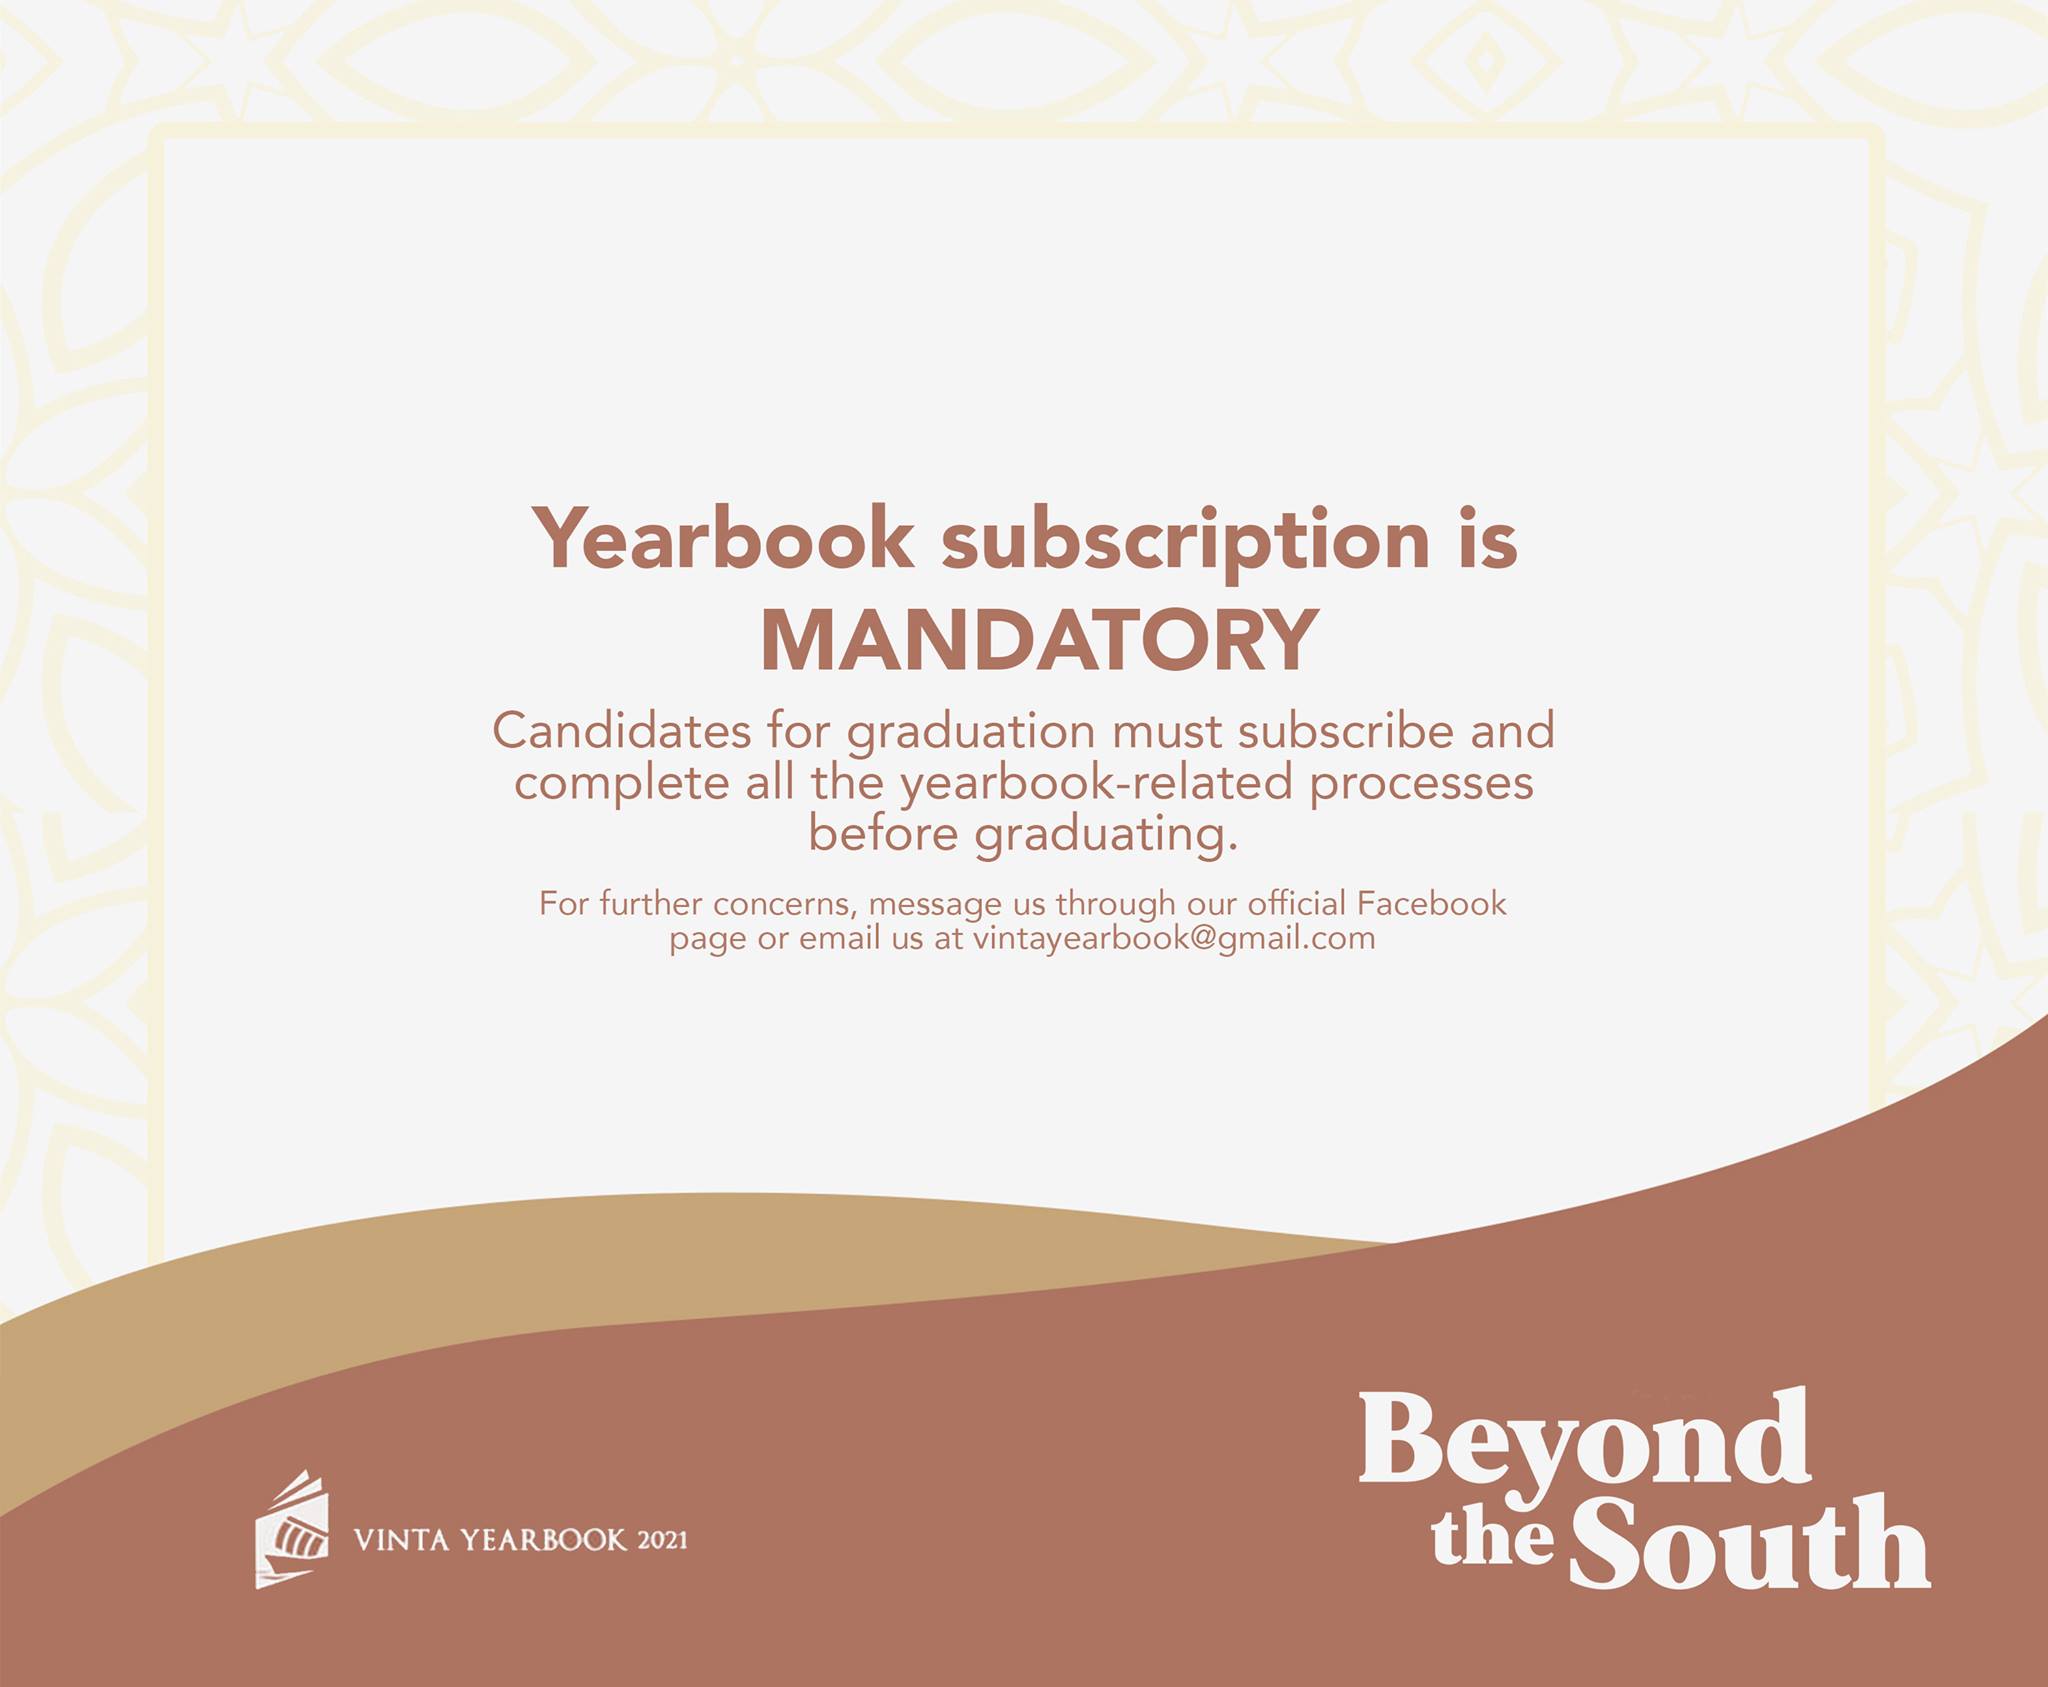 Announcement from VINTA: Yearbook subscription is mandatory